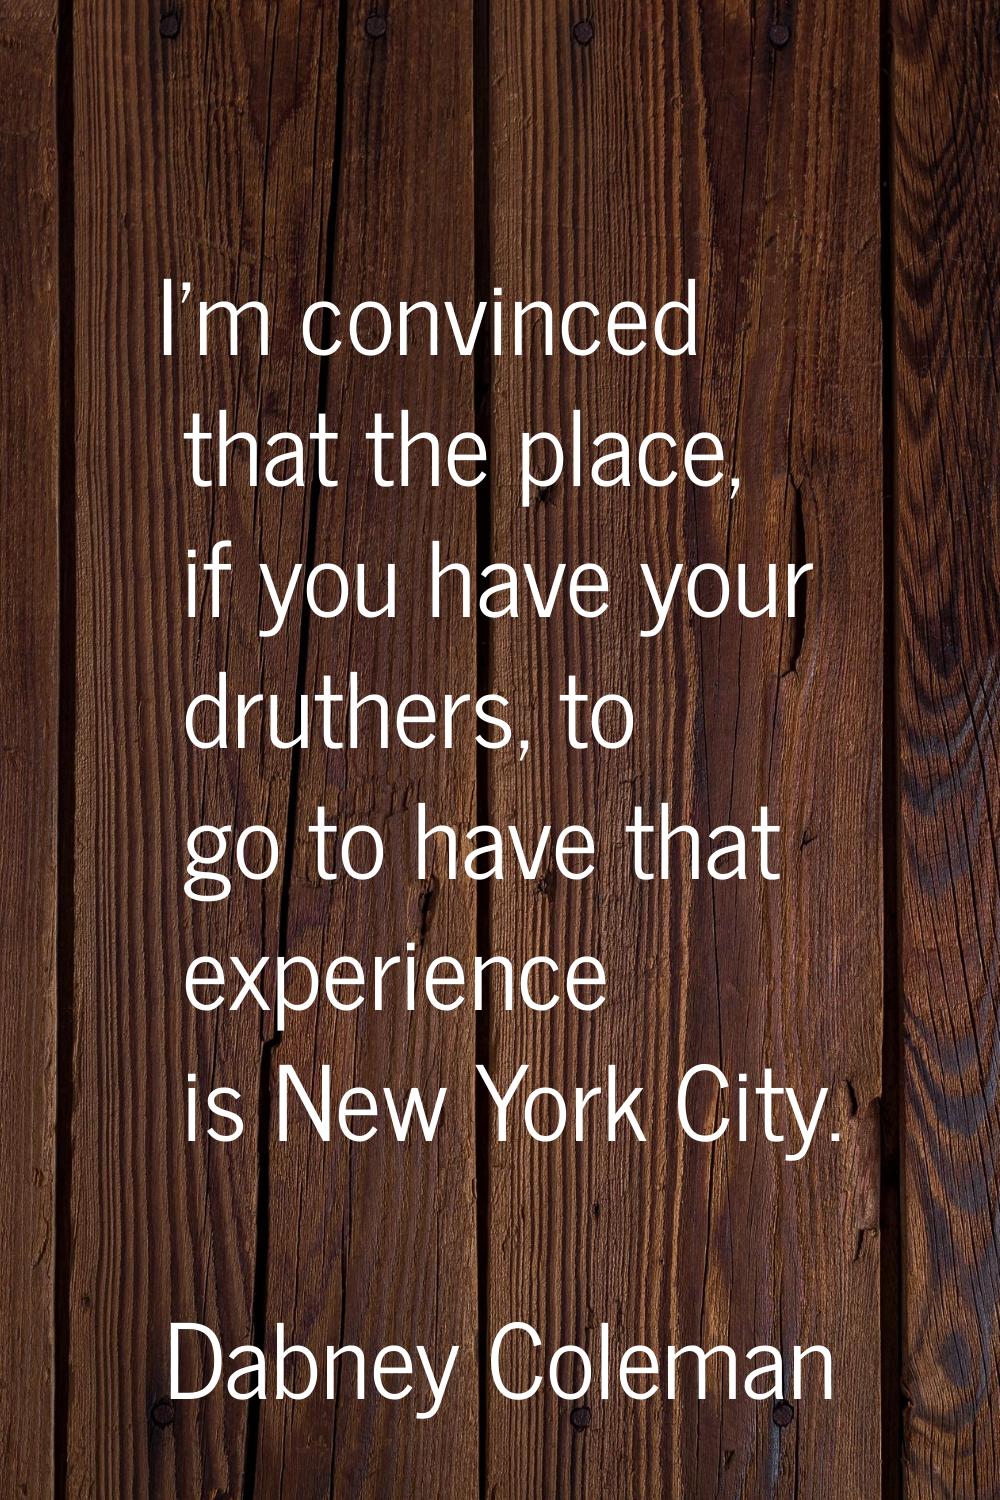 I'm convinced that the place, if you have your druthers, to go to have that experience is New York 